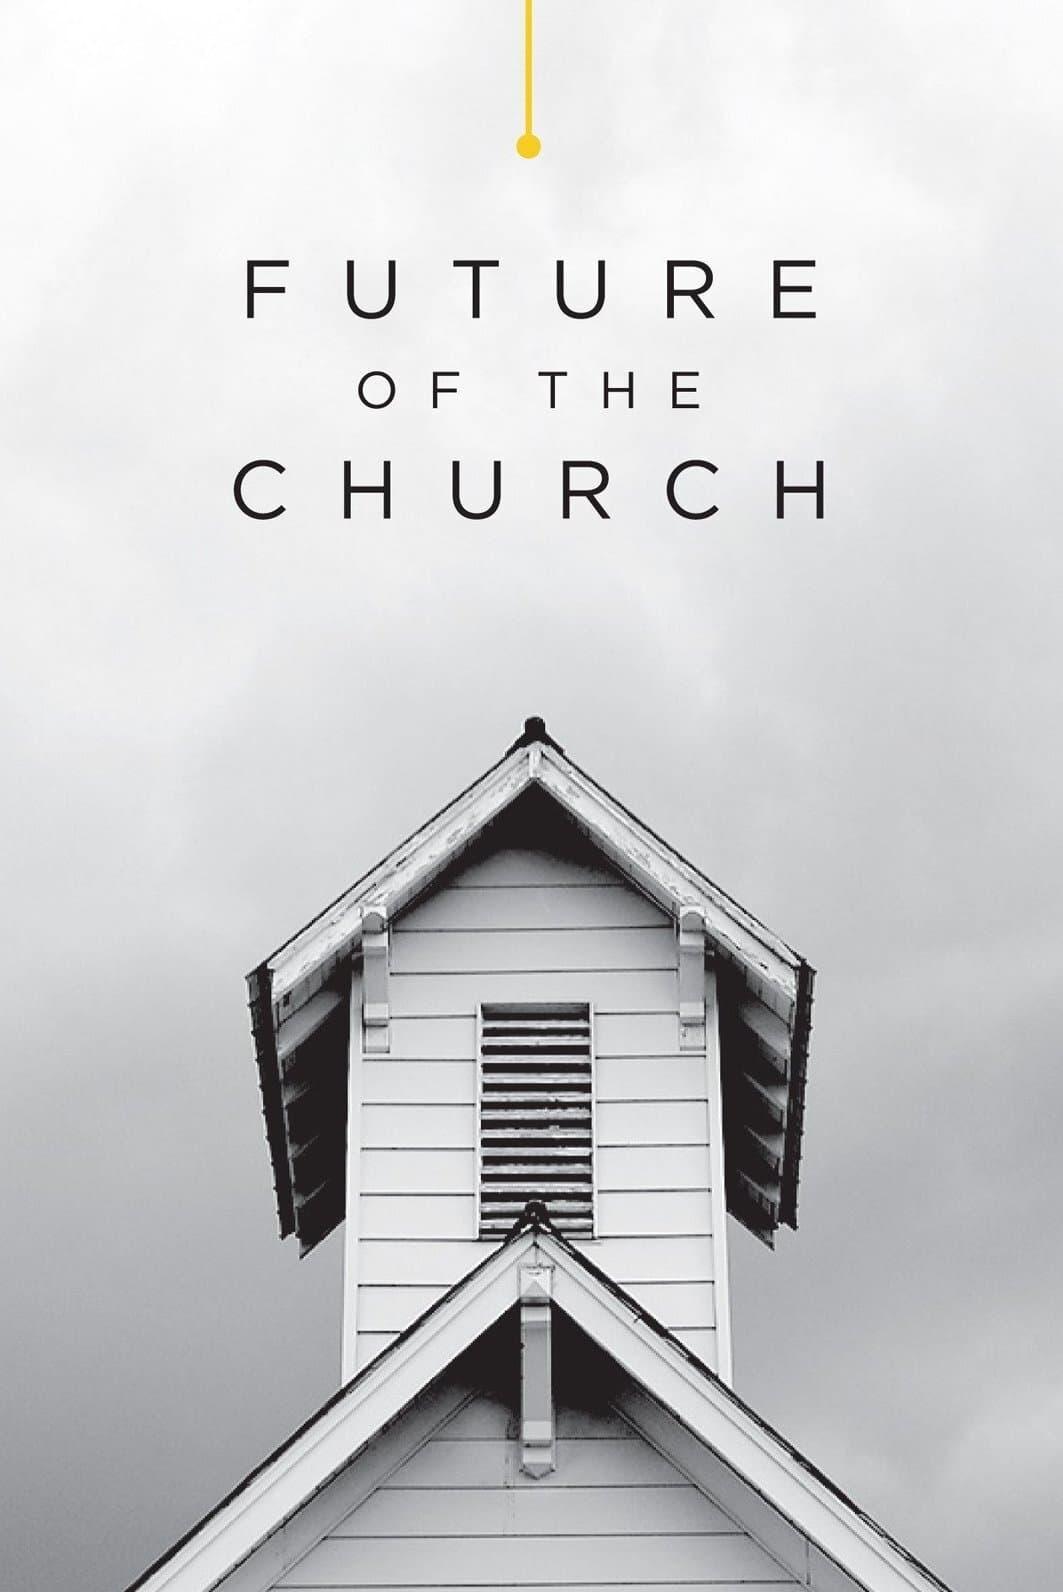 Future of the Church poster